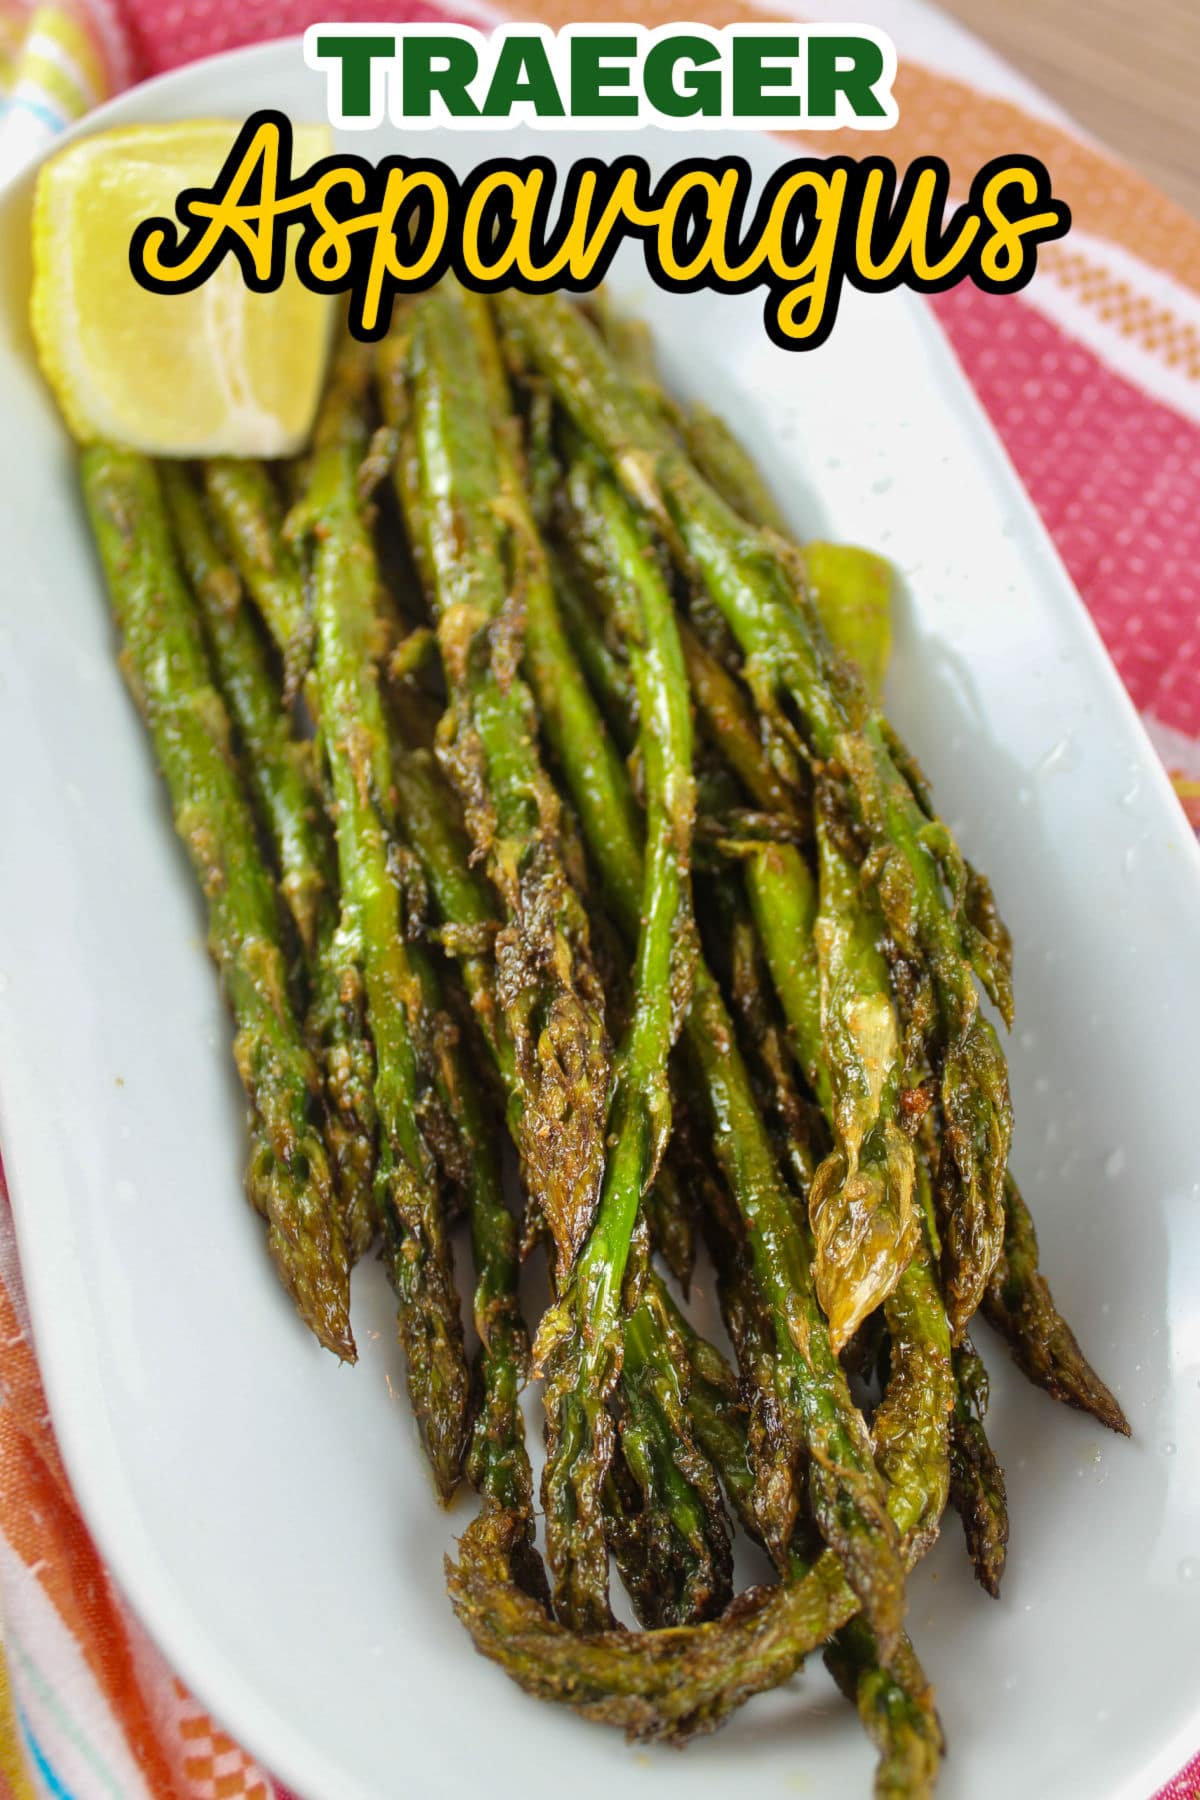 Making asparagus on the Traeger adds a smoky flavor that you'll love! It's very subtle but so delicious and makes asparagus taste even better. Asparagus is one of the easiest vegetables to cook and is a great side dish for any meal.  via @foodhussy